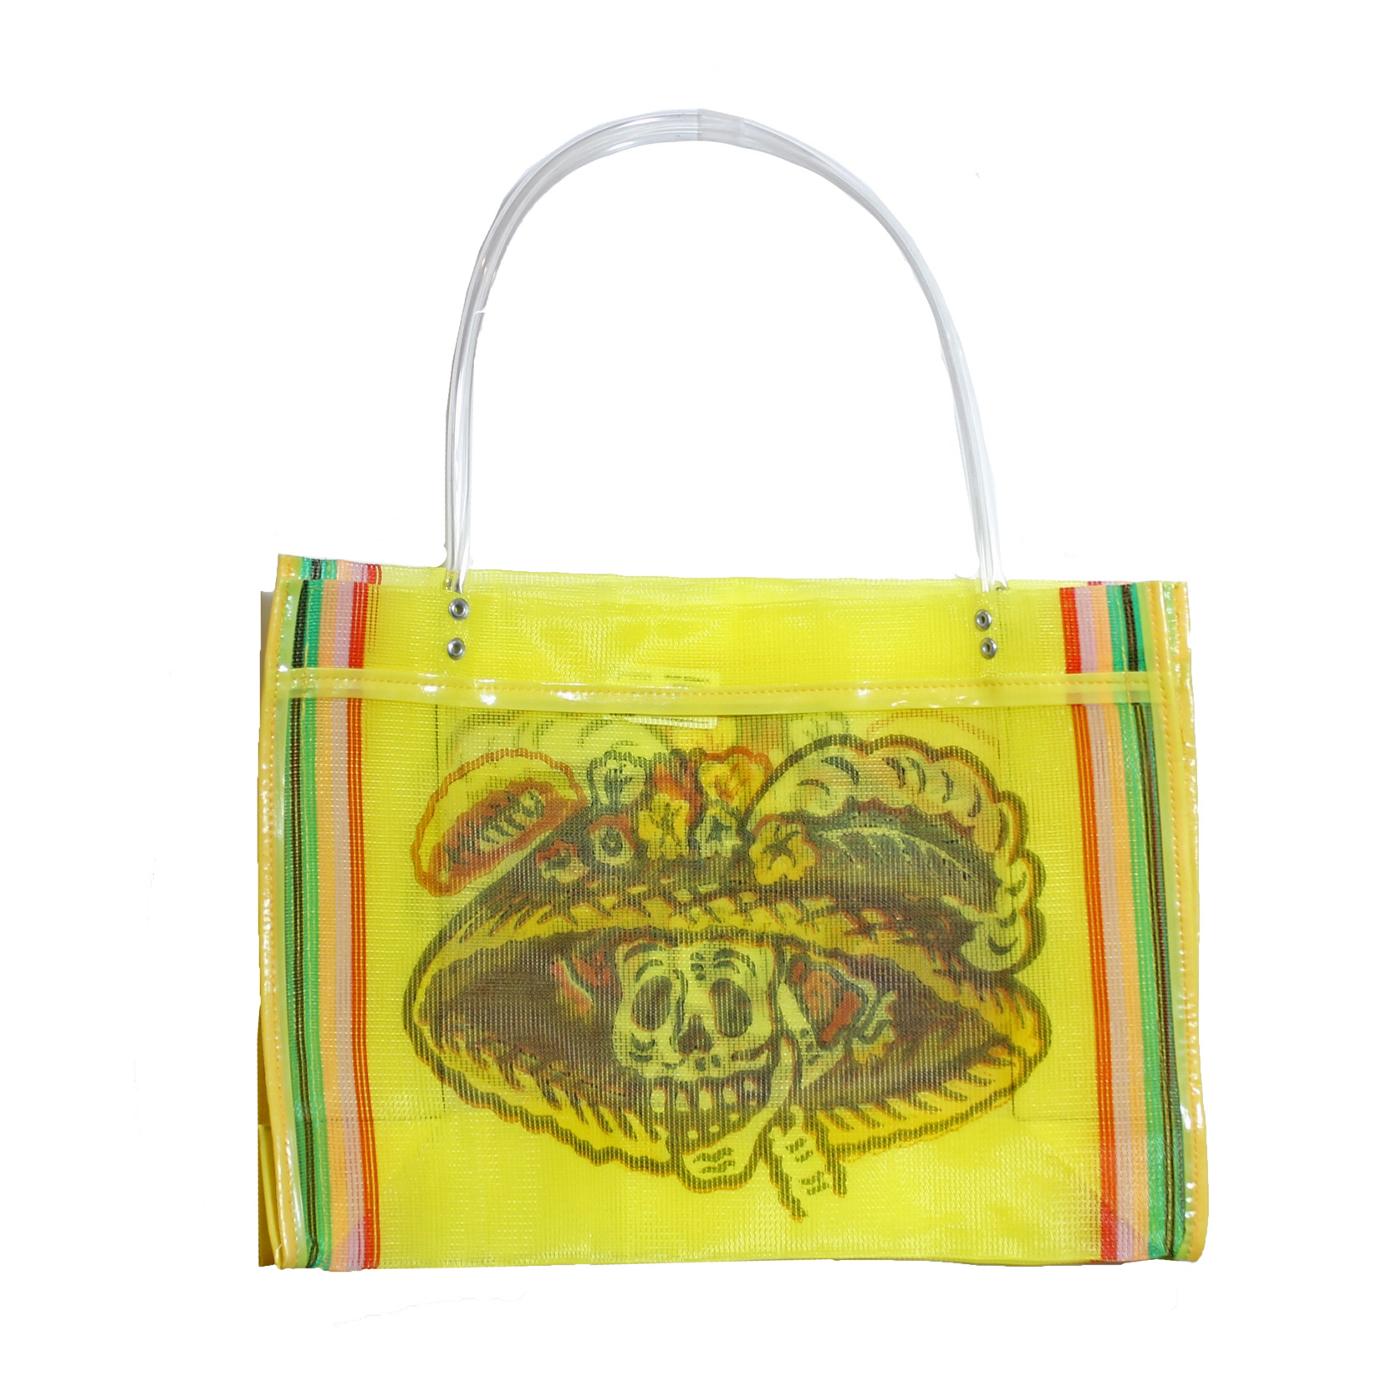 Blue Orange Pottery Day Of The Dead La Catrina Small Mesh Bag, Assorted Colors; image 6 of 6